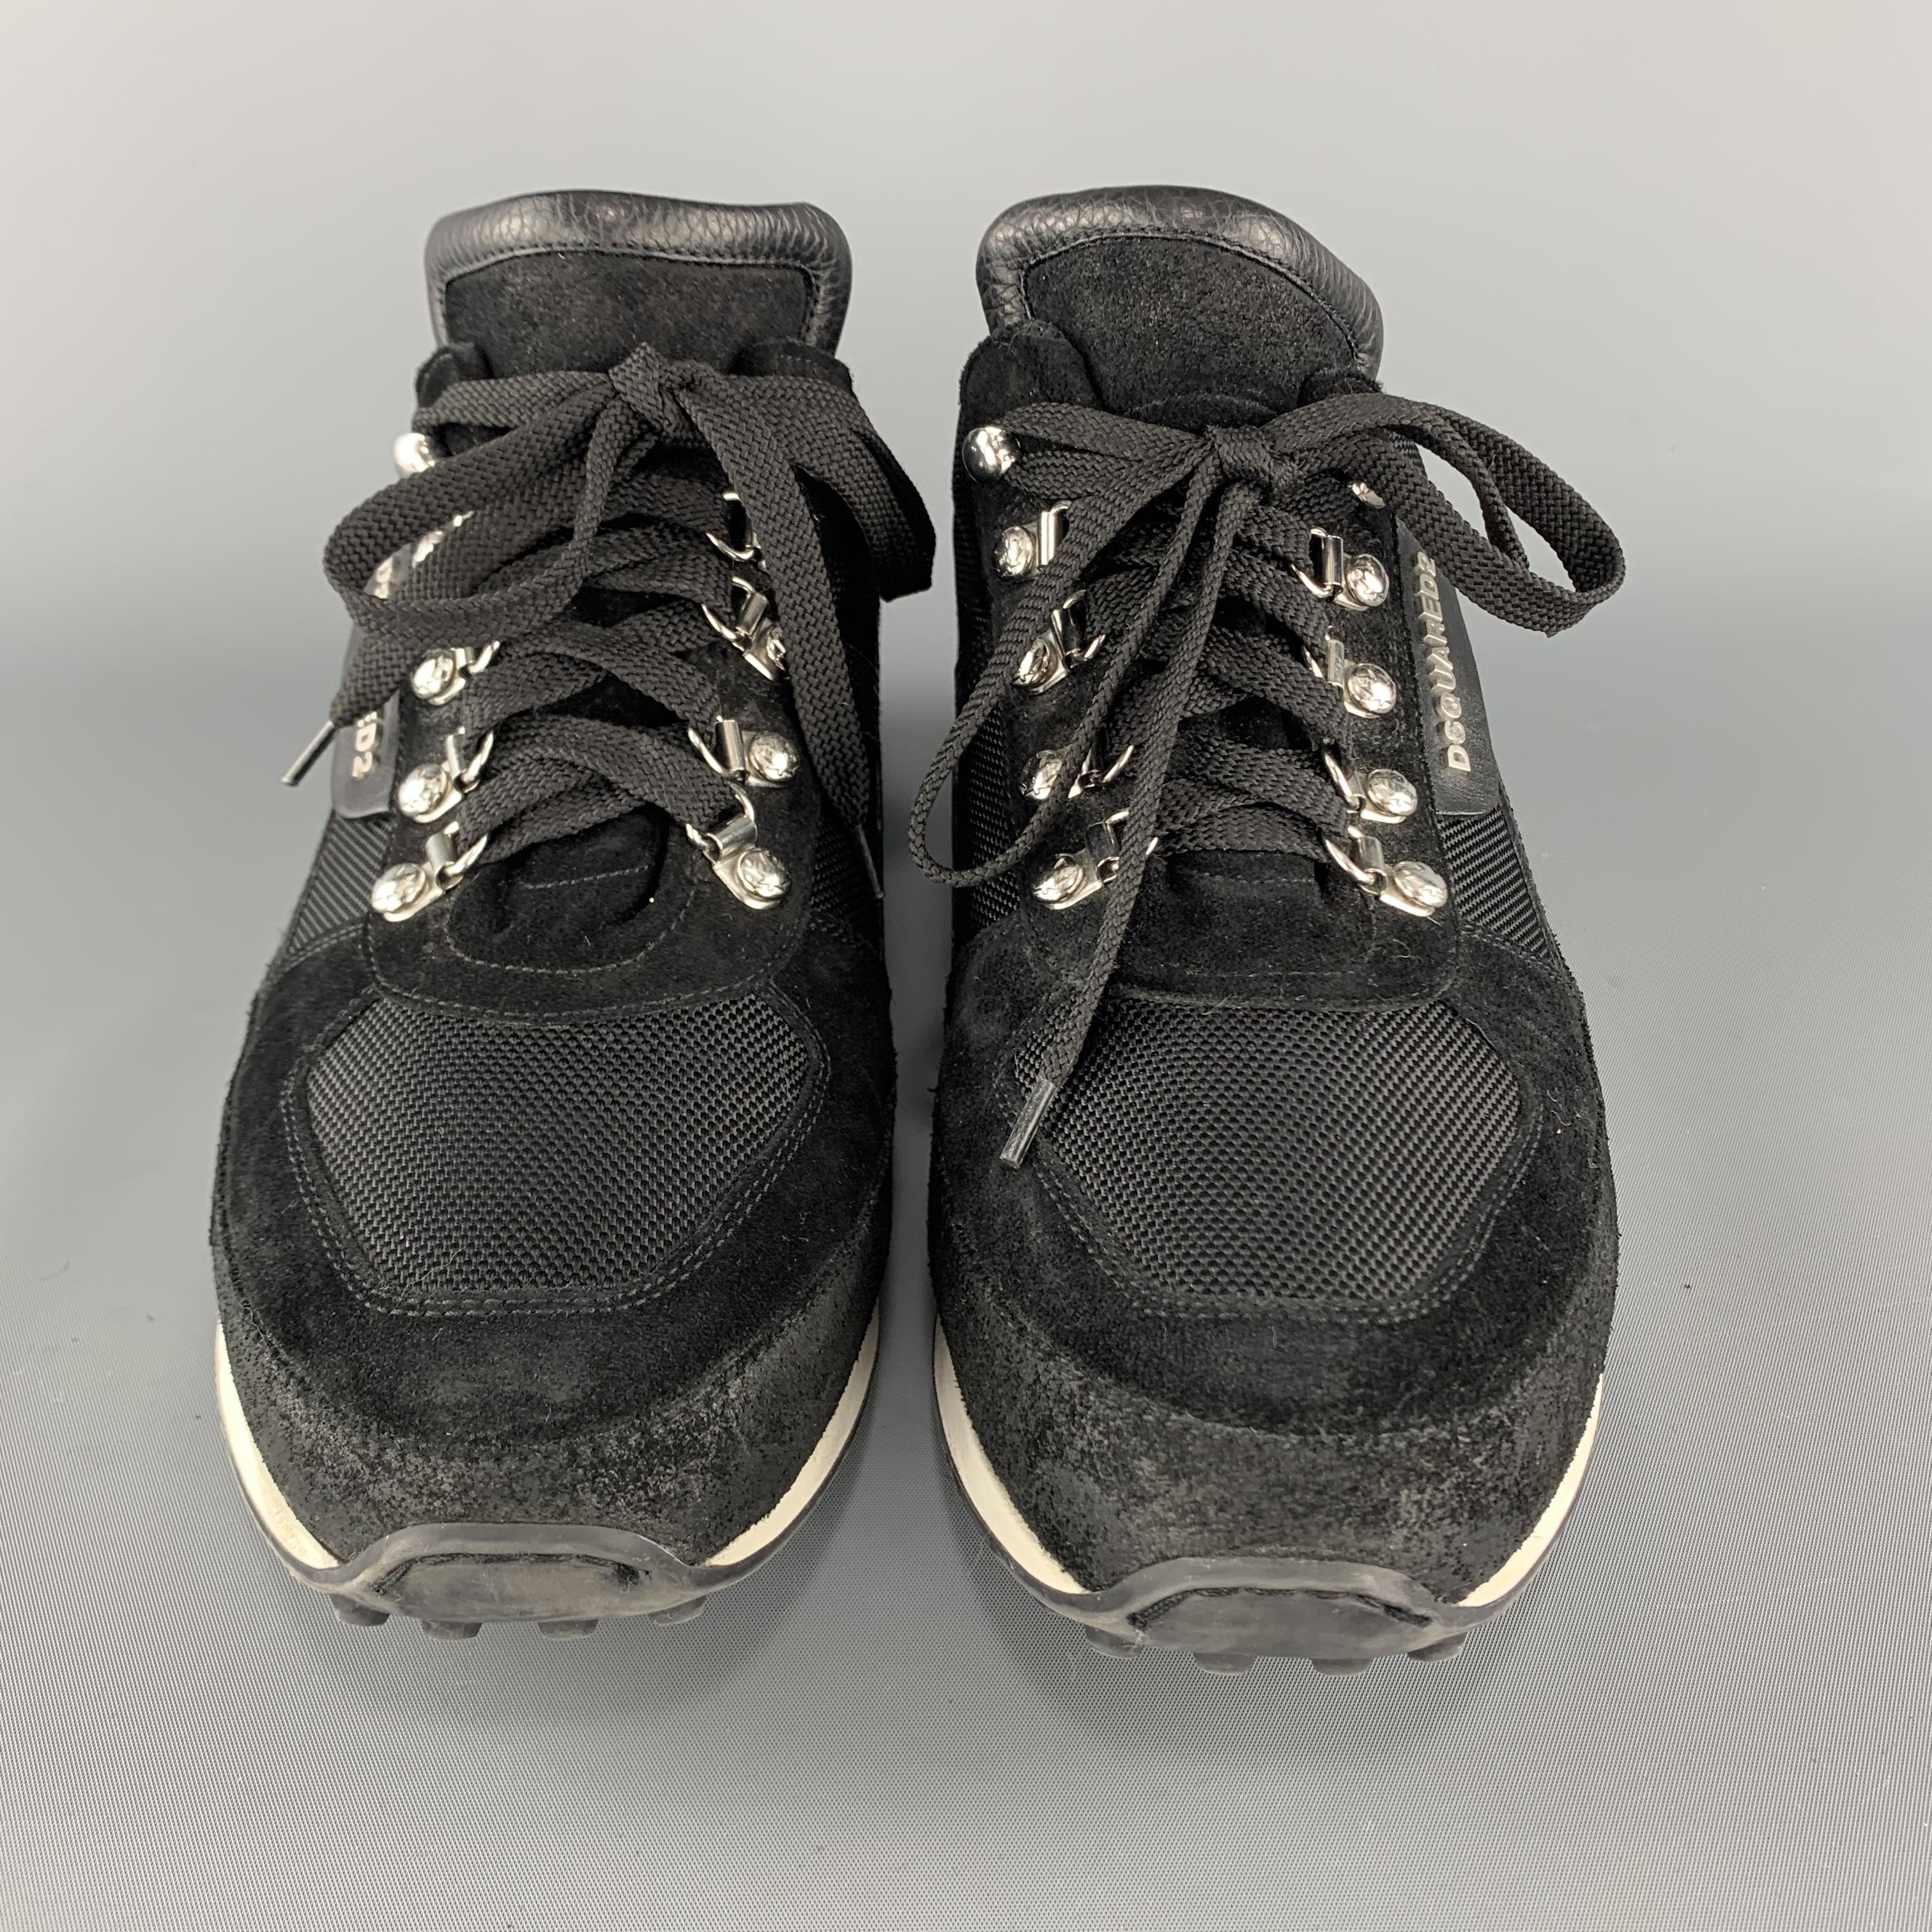 DSQUARED2 sneakers come in black canvas with leather and suede panels, lace up front with silver tone ski hooks, and white sole. Made in Italy.

Very Good Pre-Owned Condition.
Marked: IT 45

Outsole: 12.25 x 4 in.
